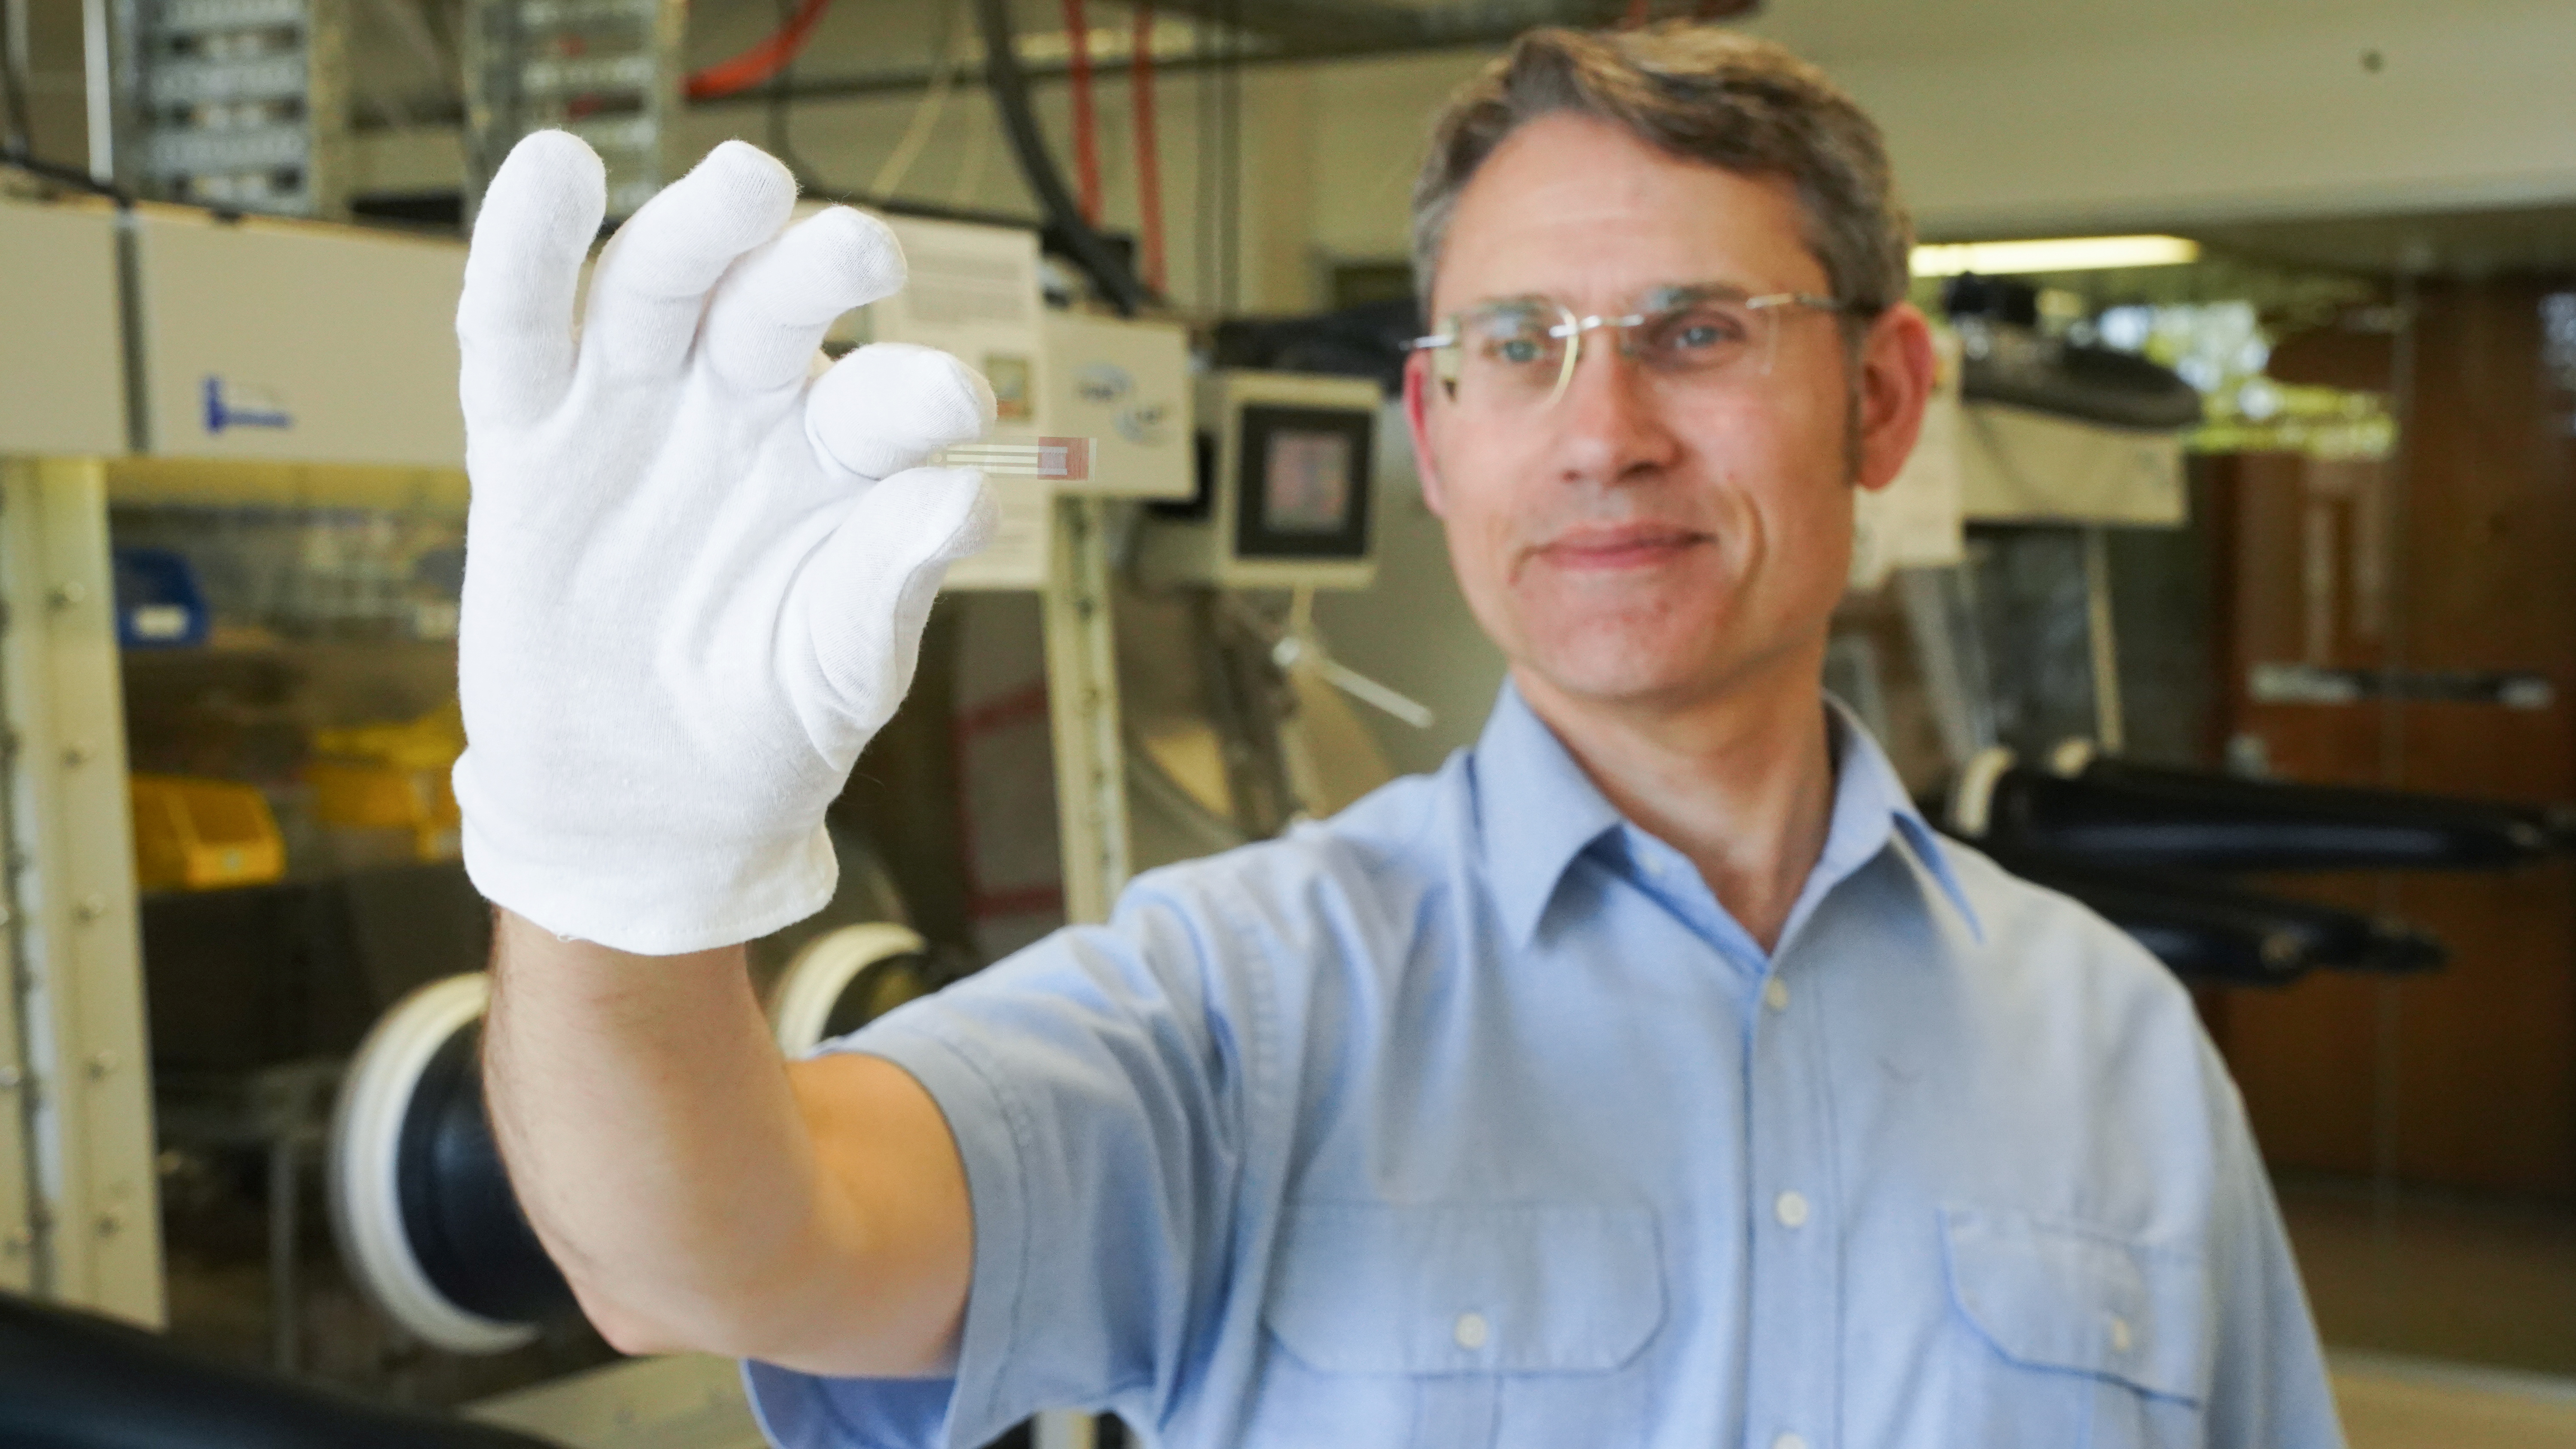 Paul Dastoor, Physicist and Research Leader at the University of Newcastle, holds a non-invasive, printable saliva test strip for diabetics, at the University of Newcastle in Australia